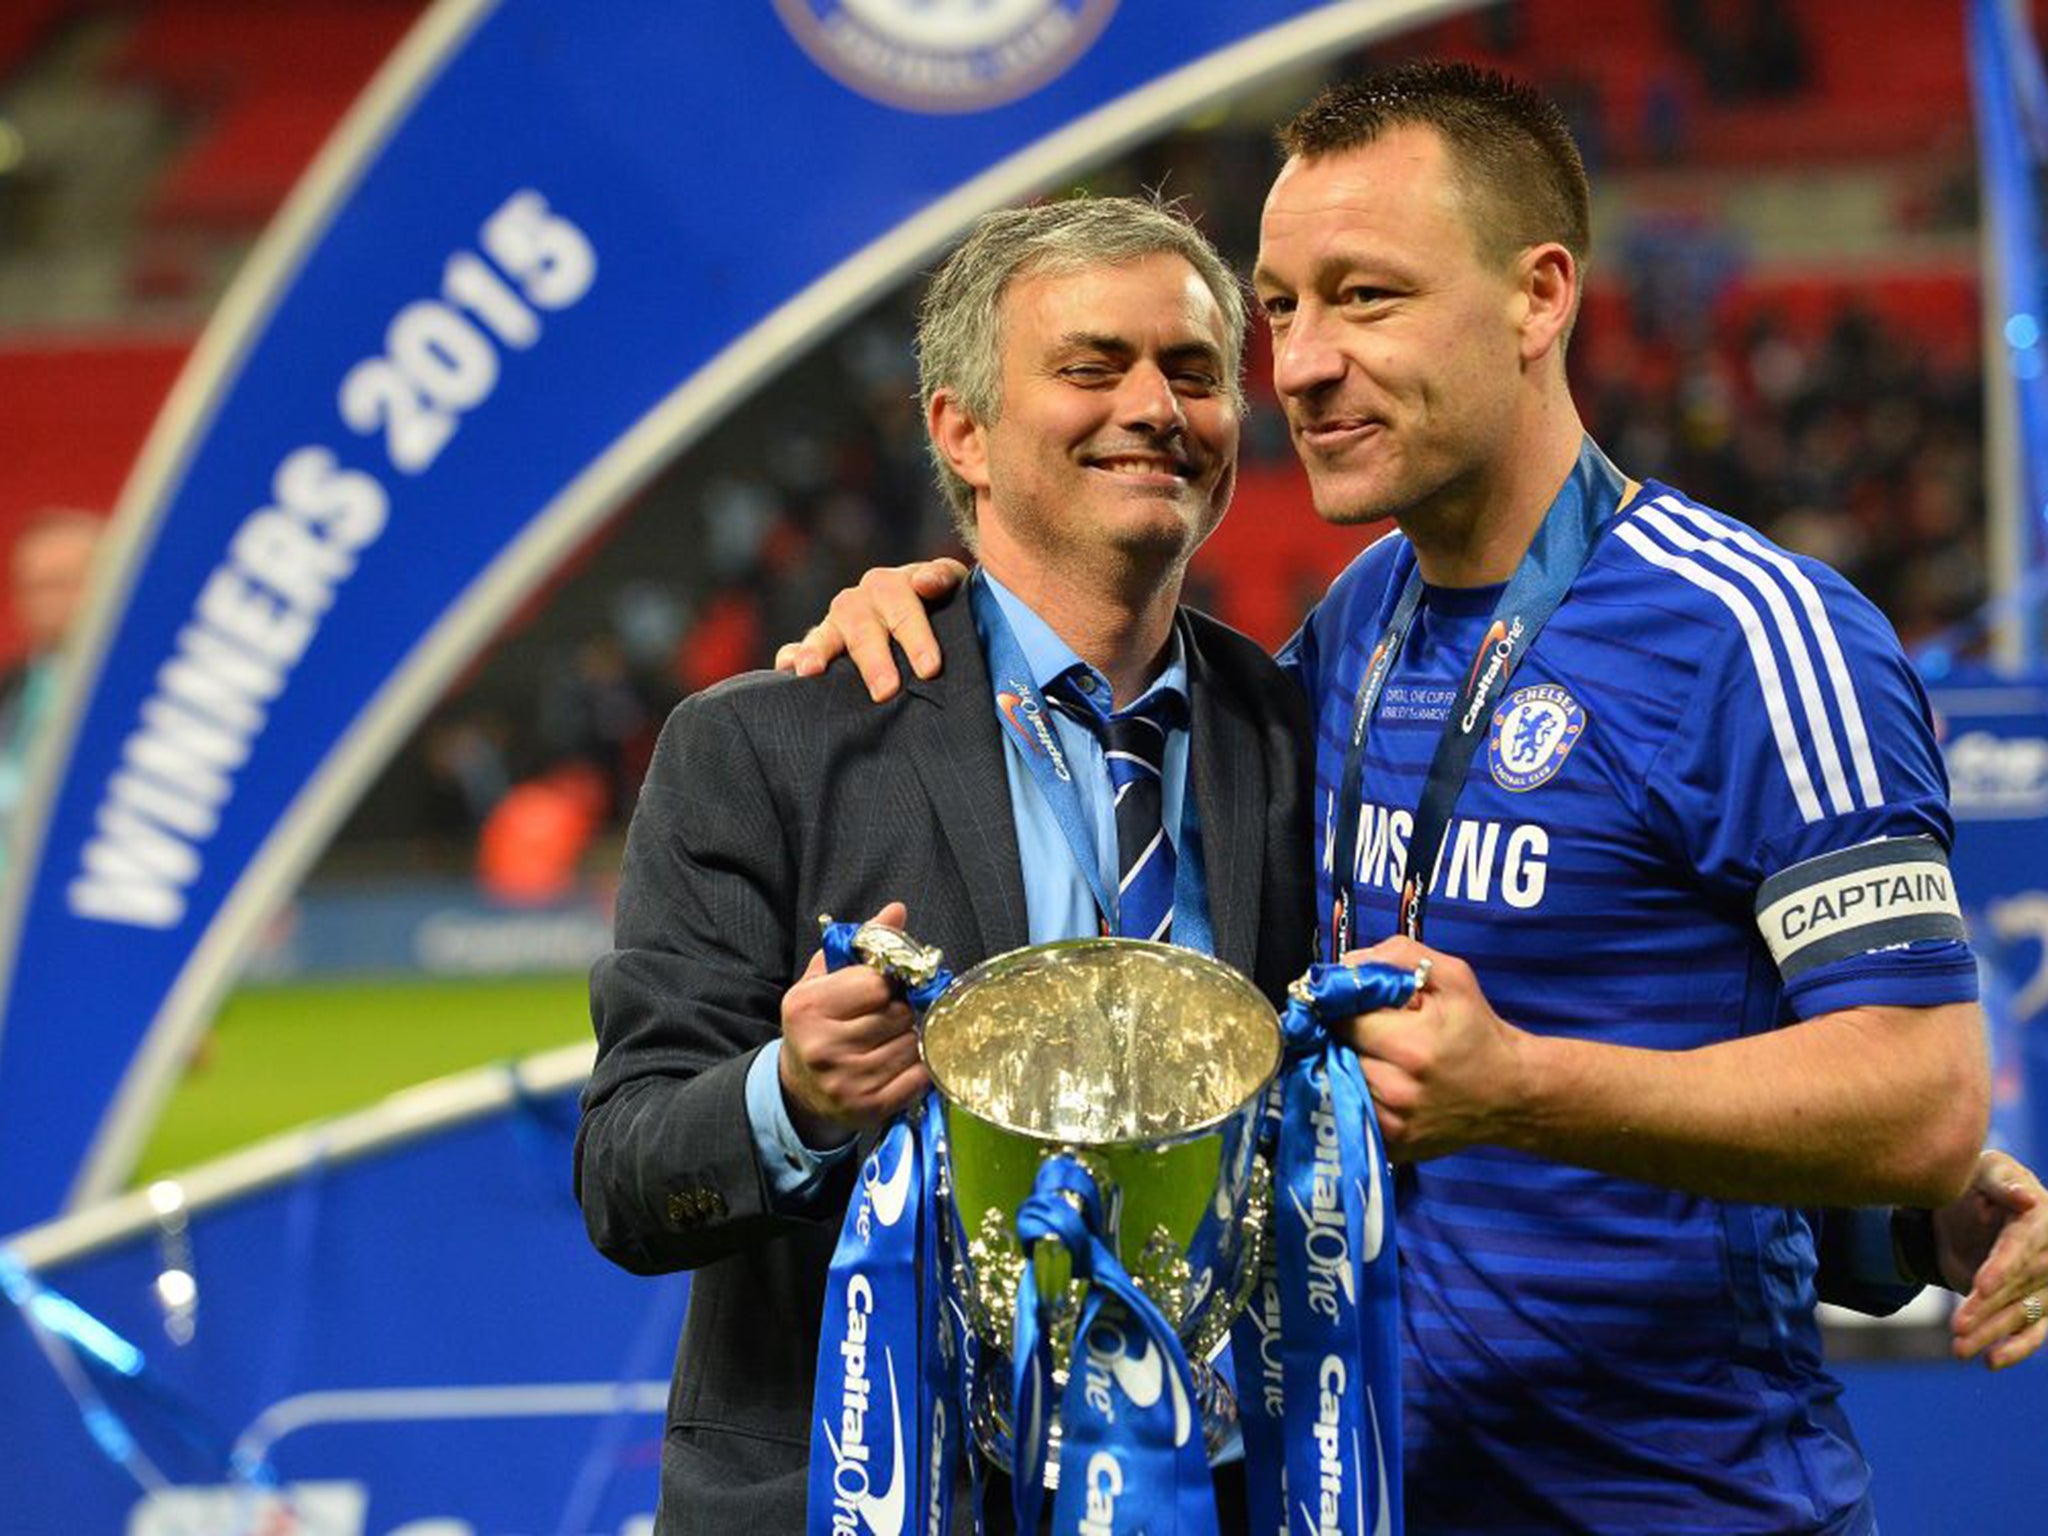 Jose Mourinho and John Terry look set to add the Premier League to their League Cup win earlier this year